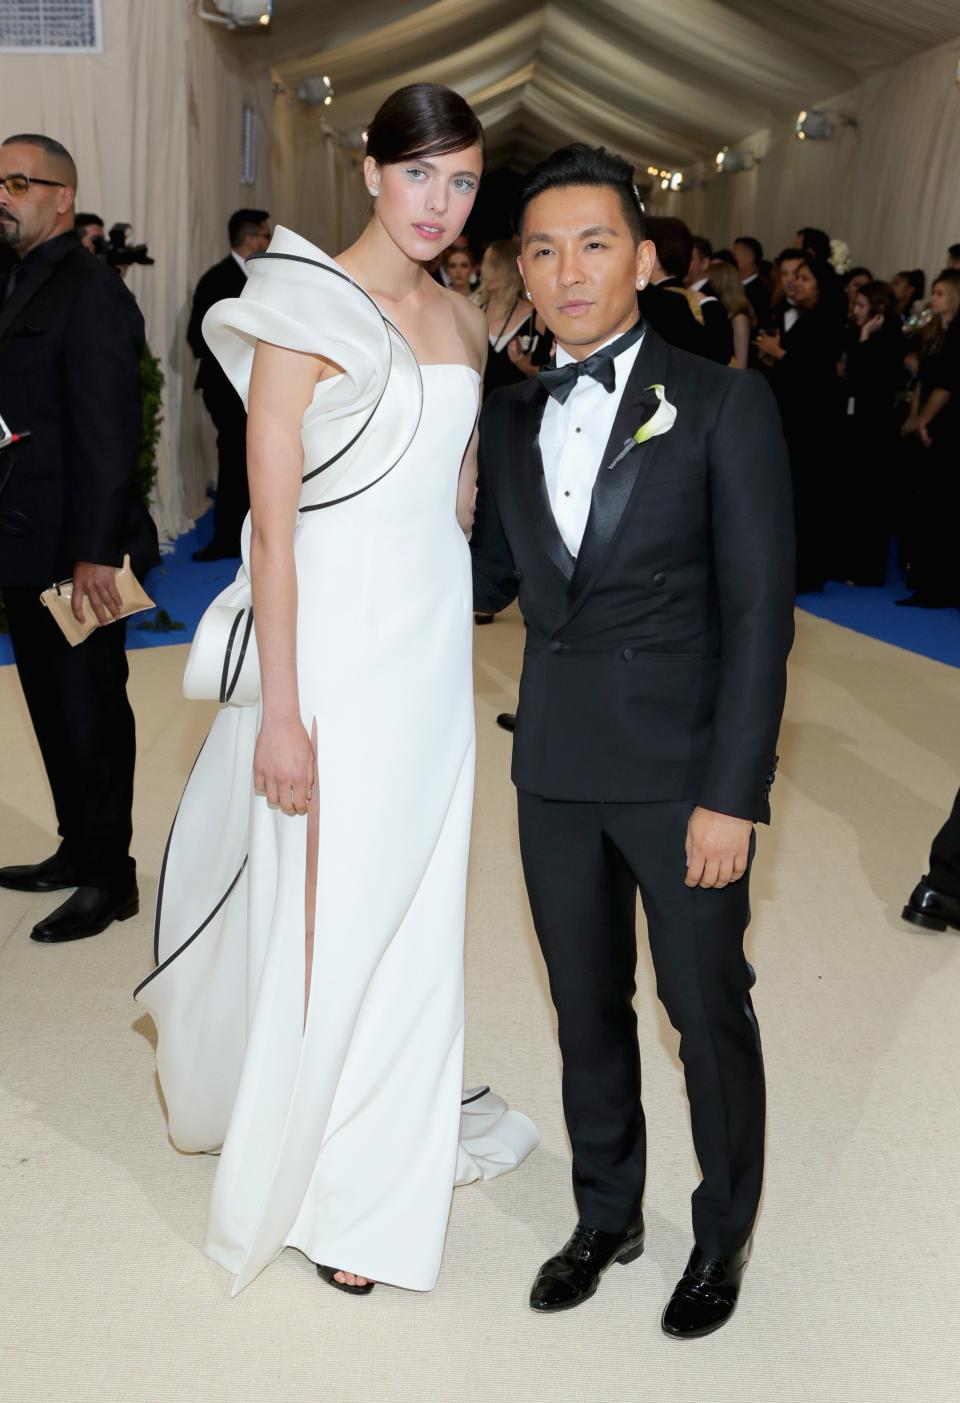 <h1 class="title">Margaret Qualley with Dauphin jewelry and Prabal Gurung</h1><cite class="credit">Photo: Getty Images</cite>